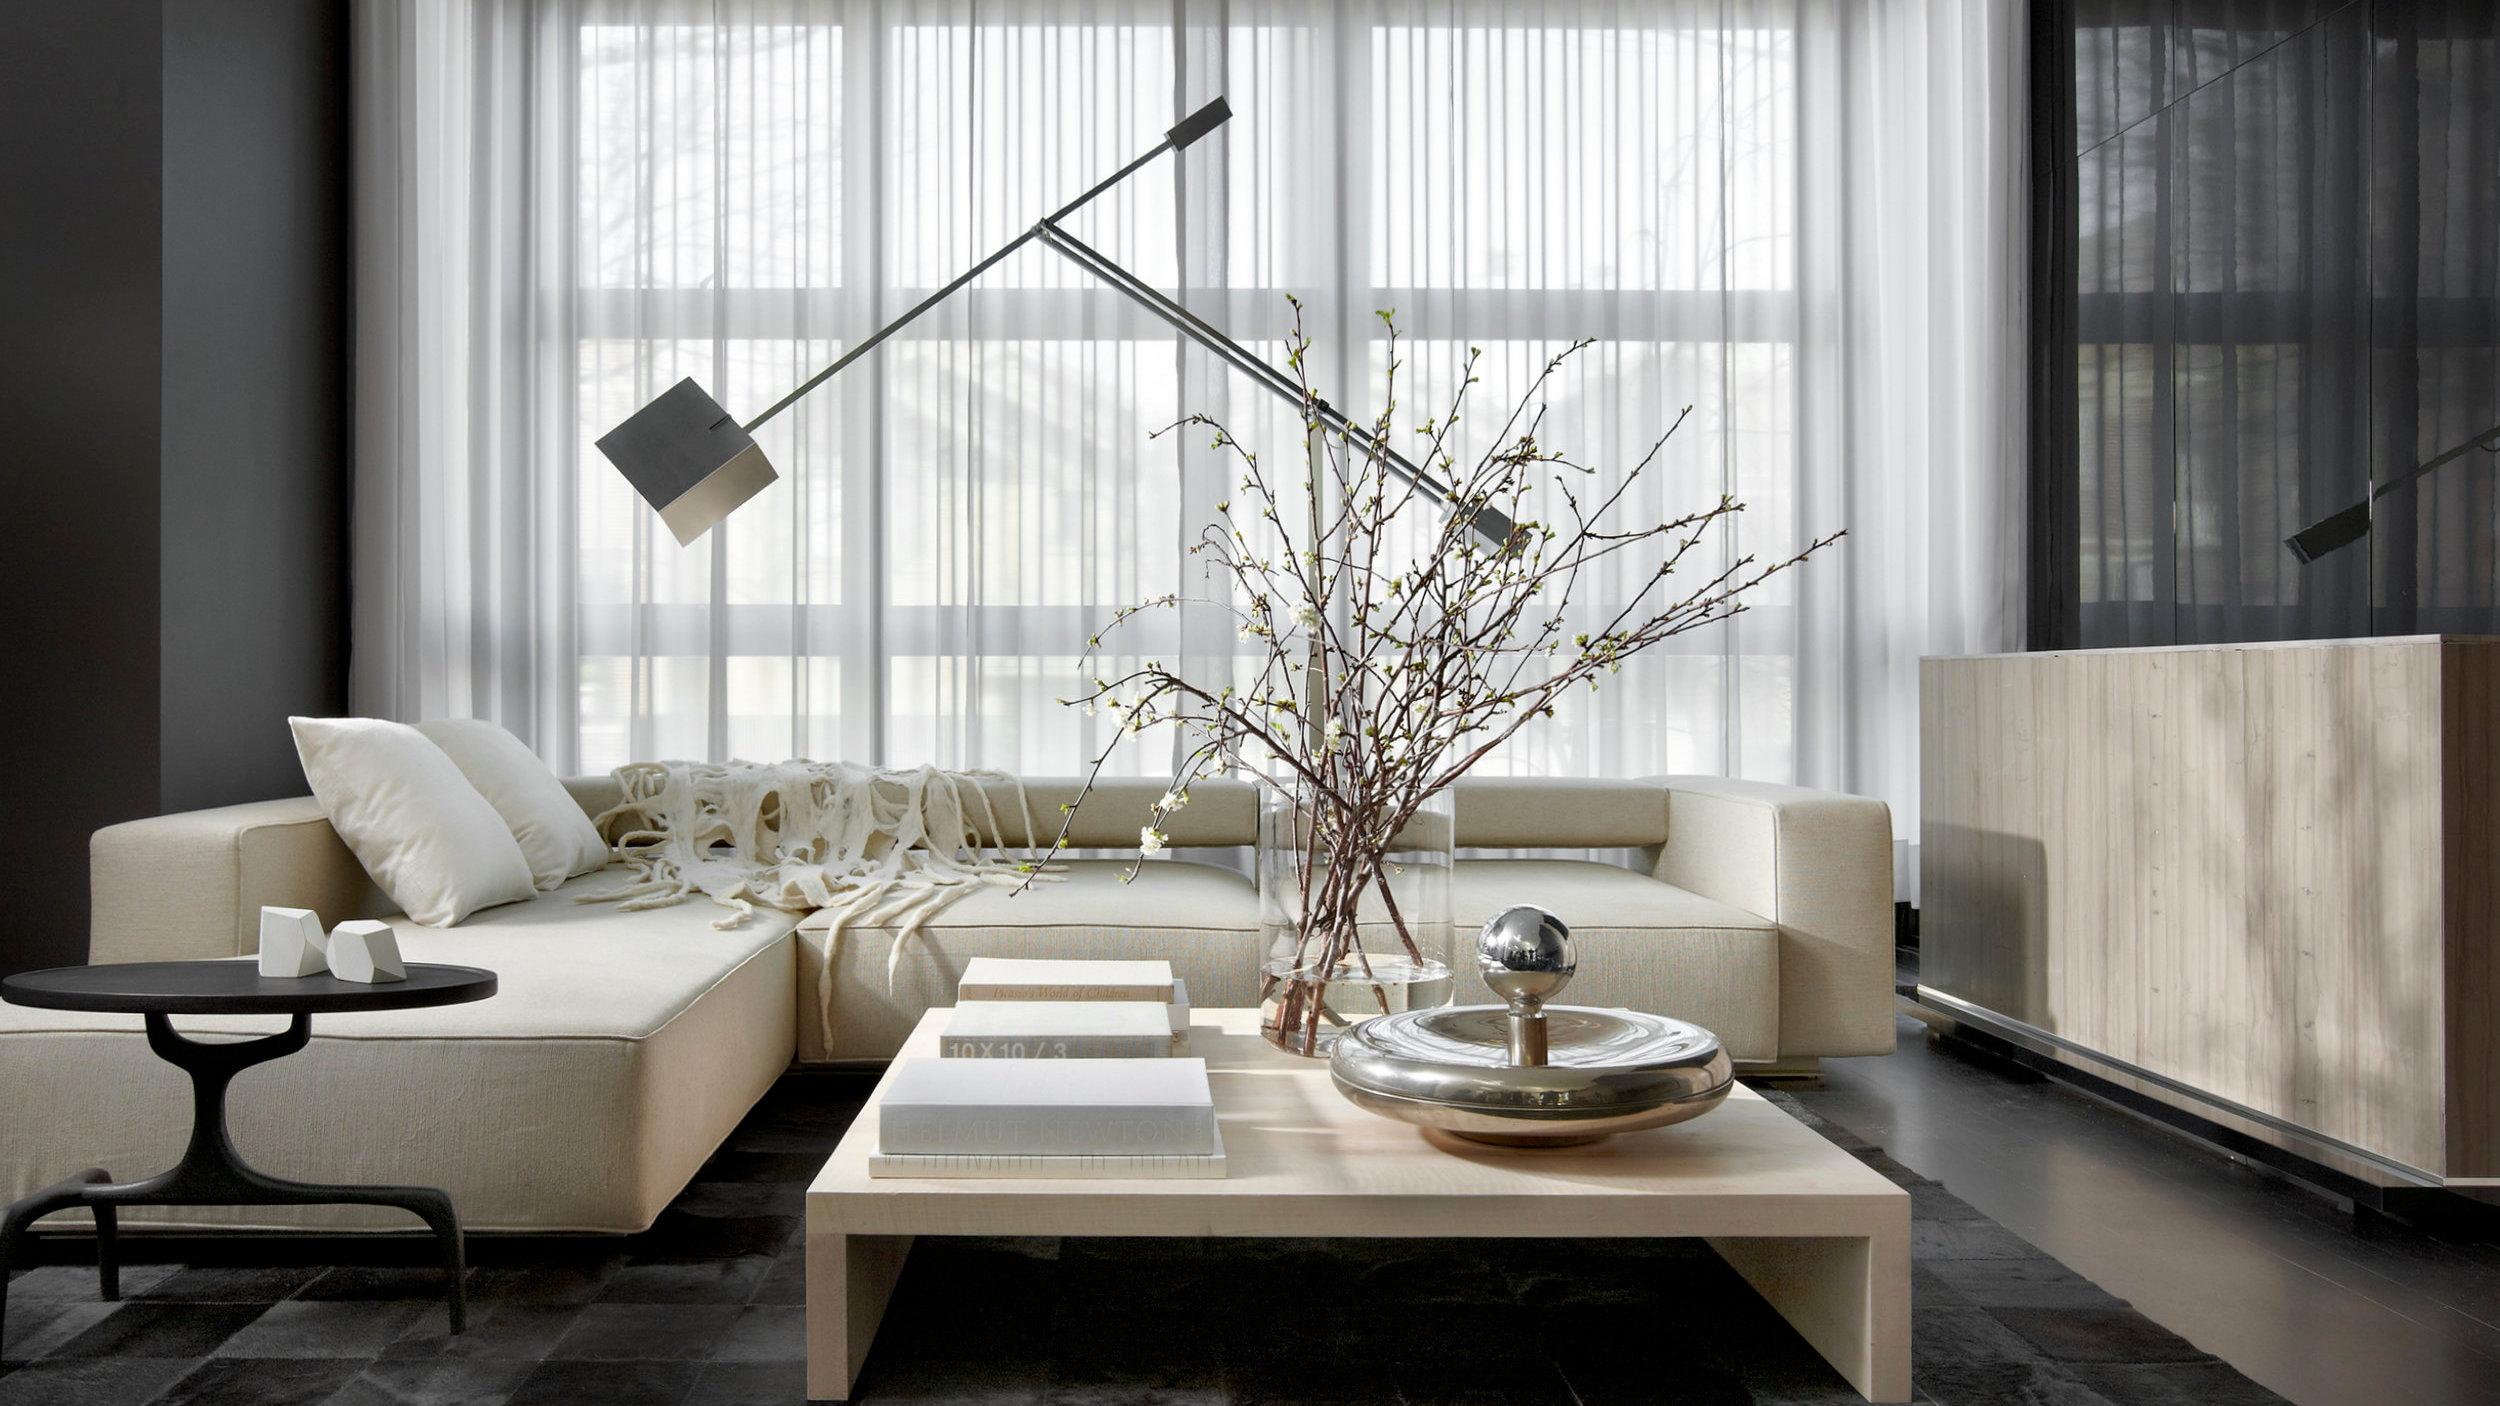 Genius, intuition, balance. Giraffa is an adjustable and extendable aluminum floor lamp with chromed brass details. A system of counterweights makes it possible for the lamp to be placed in endless configurations. A boom microphone used in TV